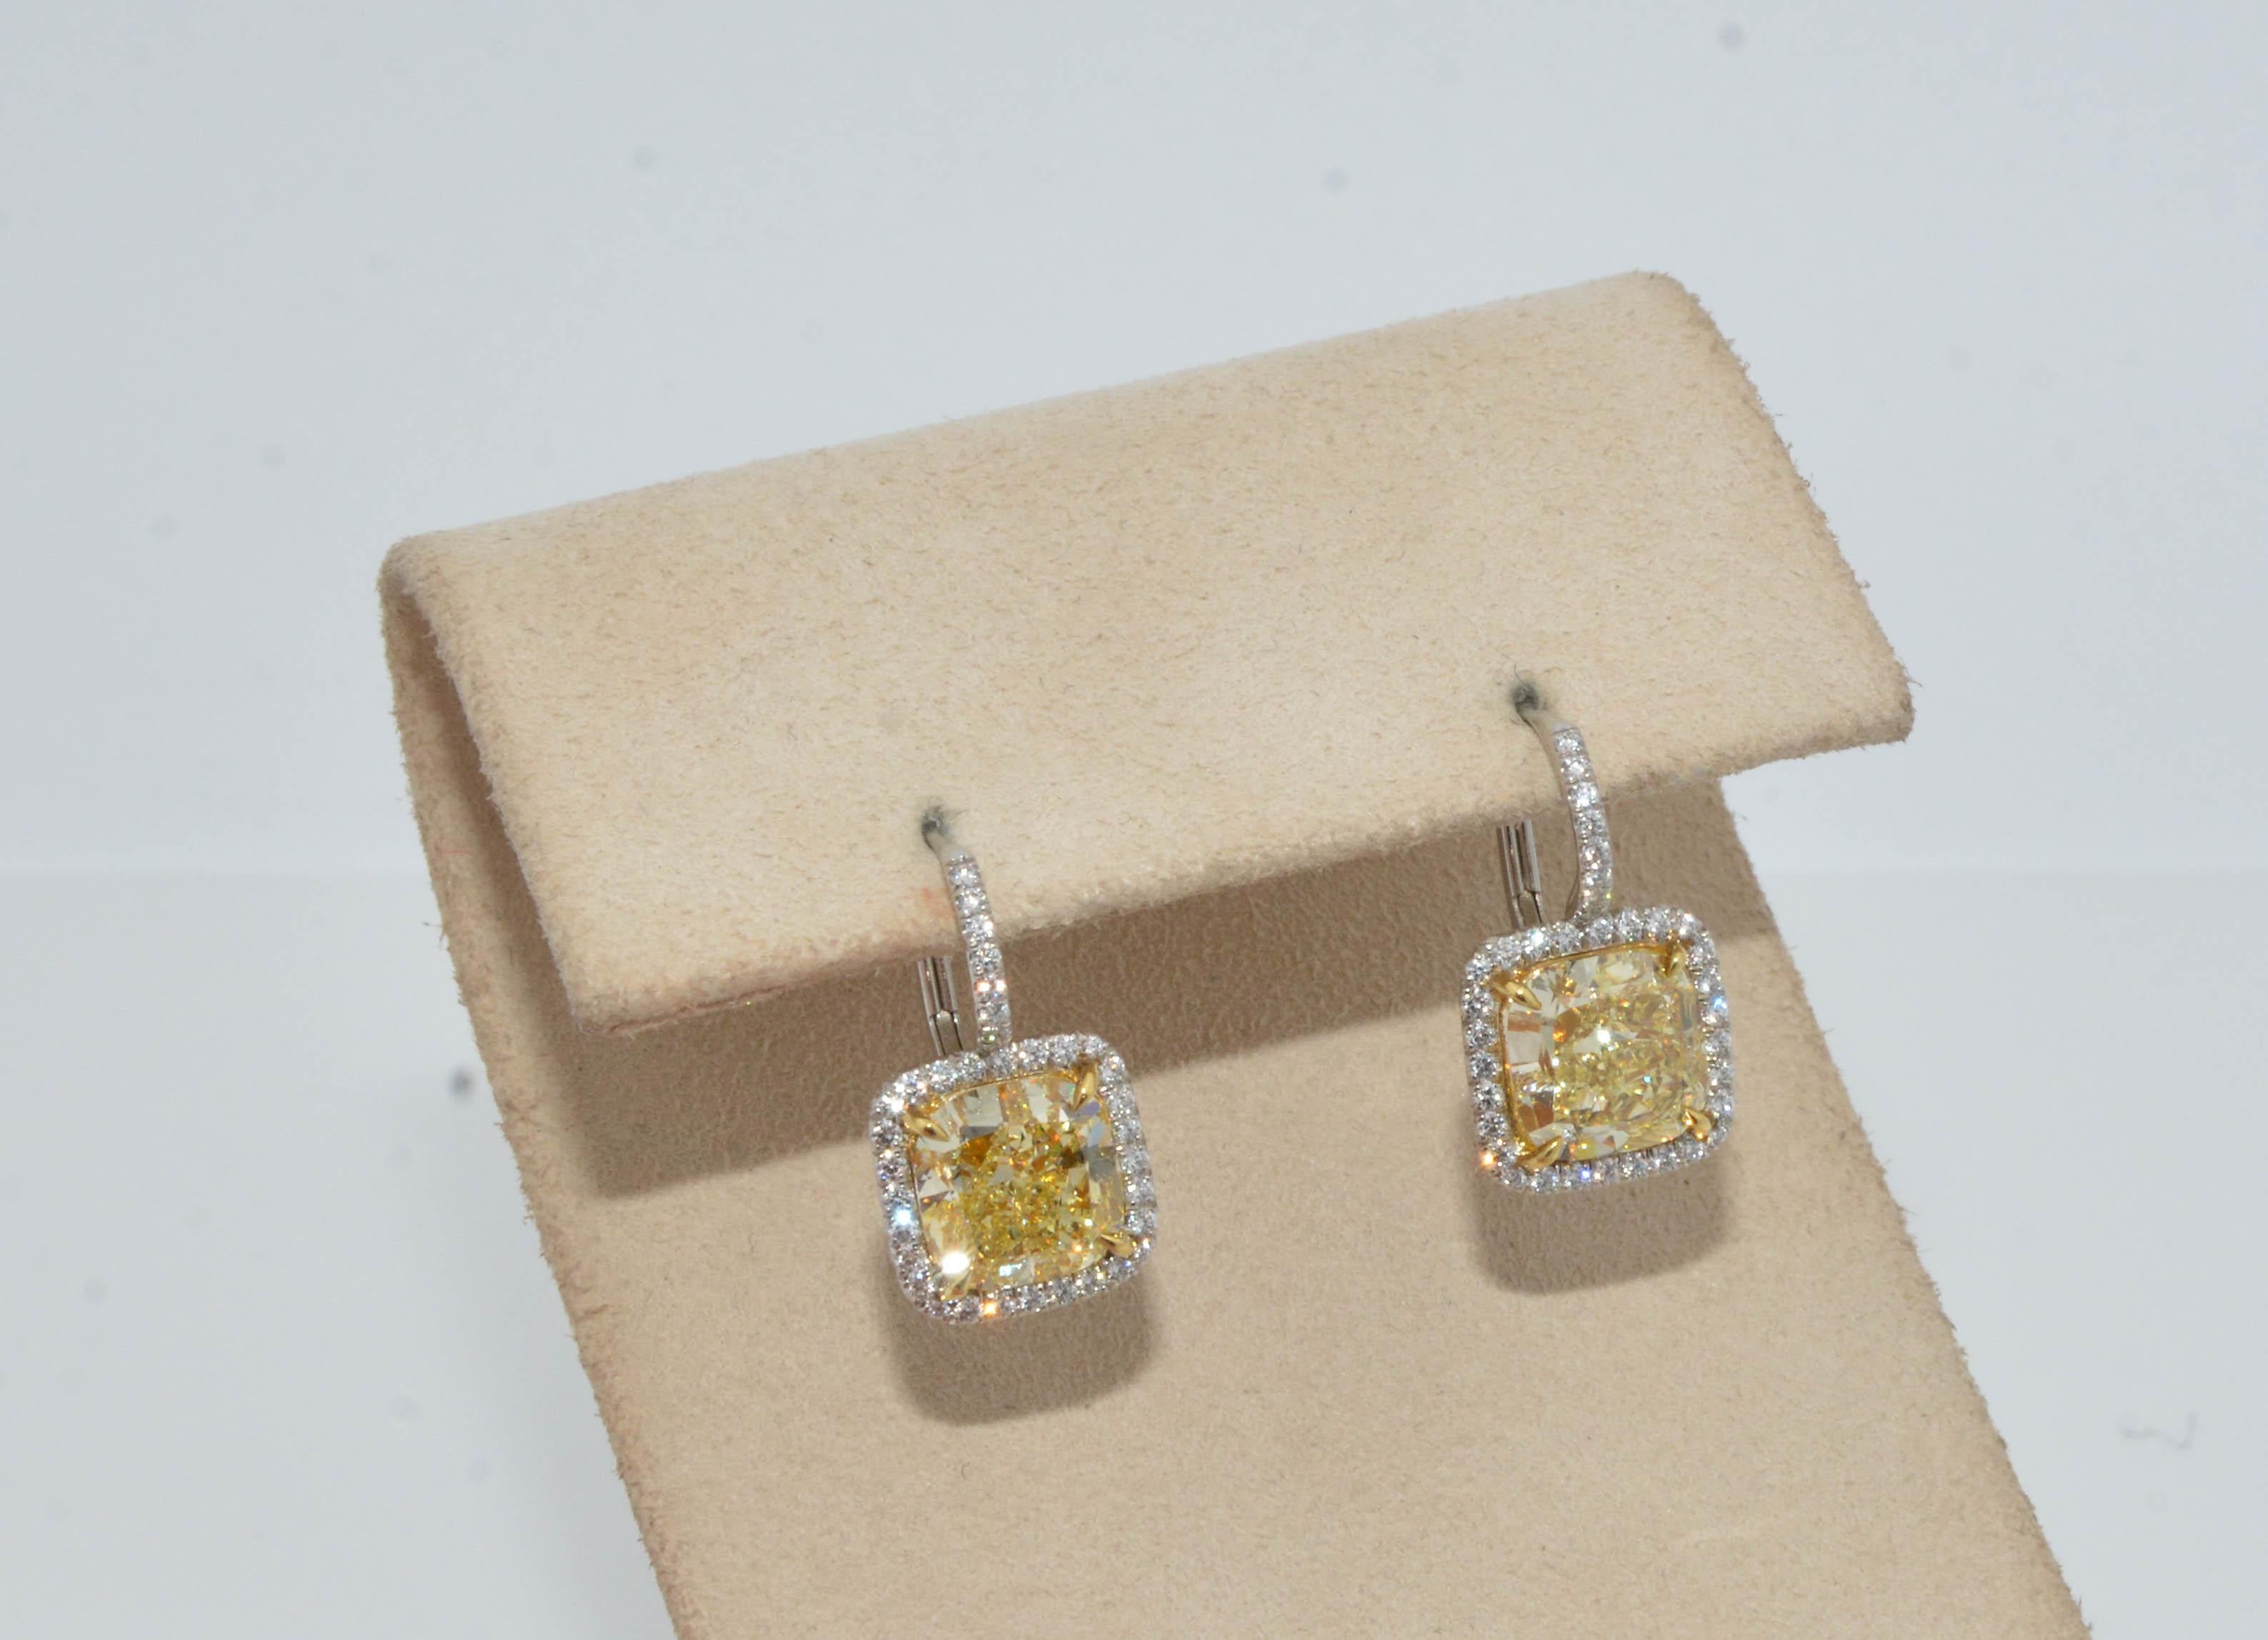 Shine your light all night with these spectacular yellow diamond earrings! Set in 18K white gold with two fancy yellow cushion cut diamonds ( one diamond weighs 2.52ctw and the other weighs 2.58ctw; clarity VVS1). Framing the yellow diamonds is a